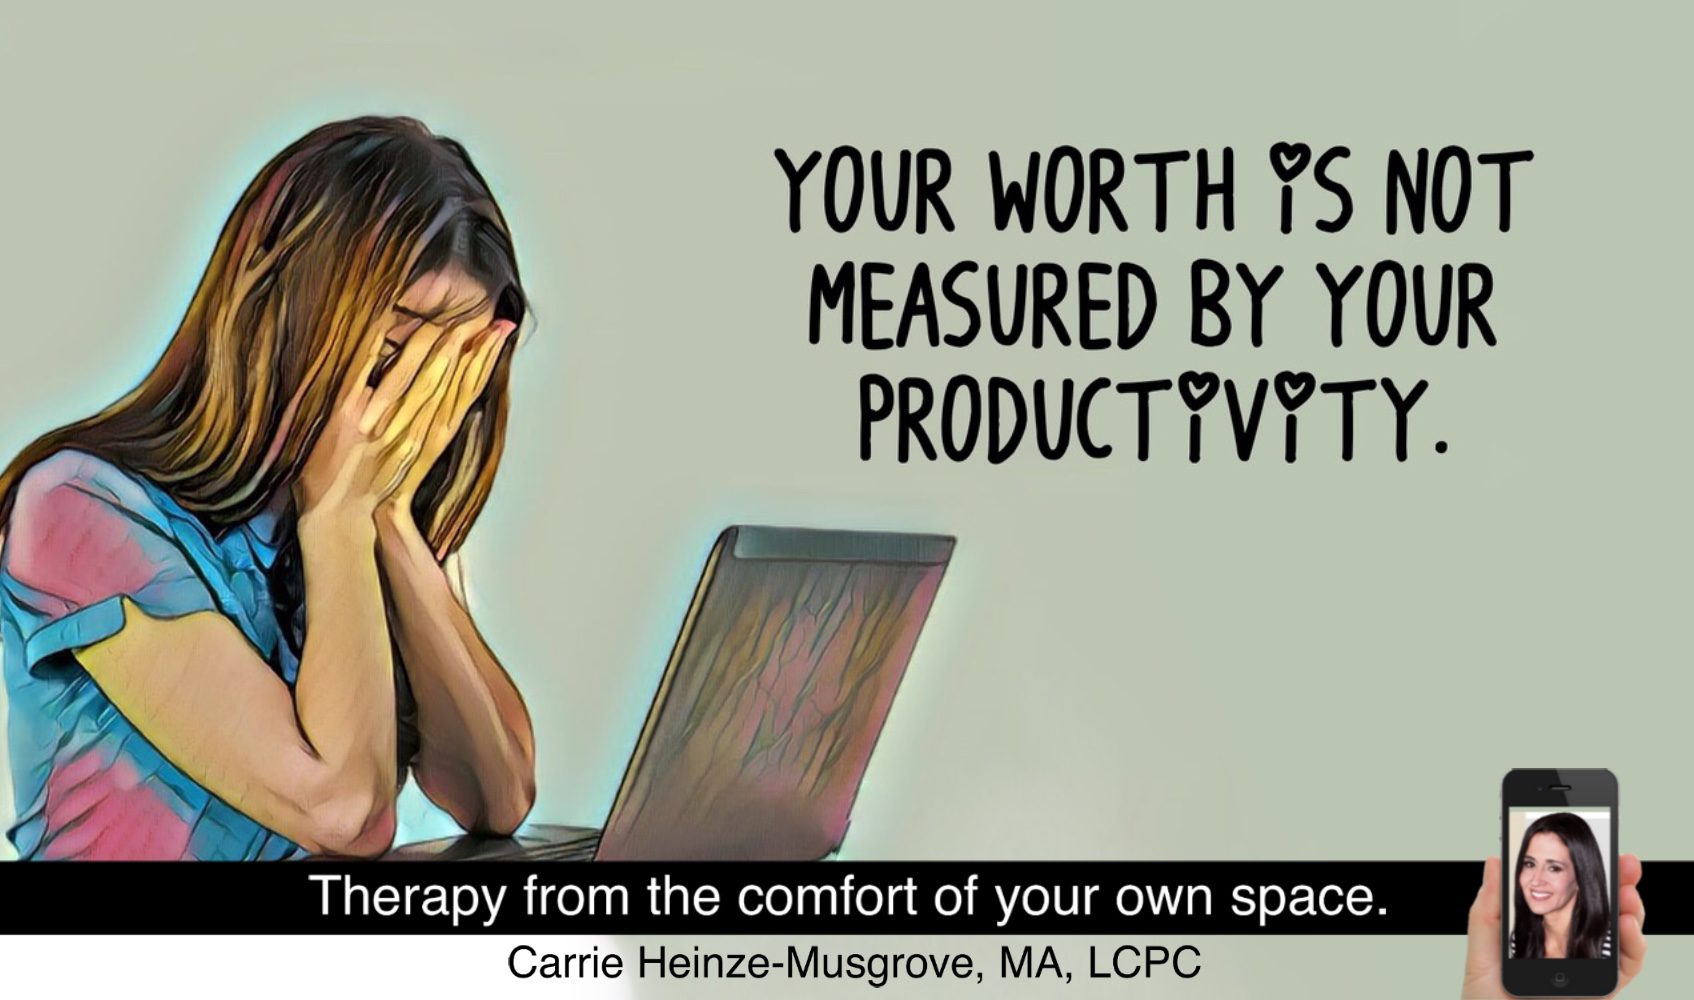 Your worth is not measured by your productivity.